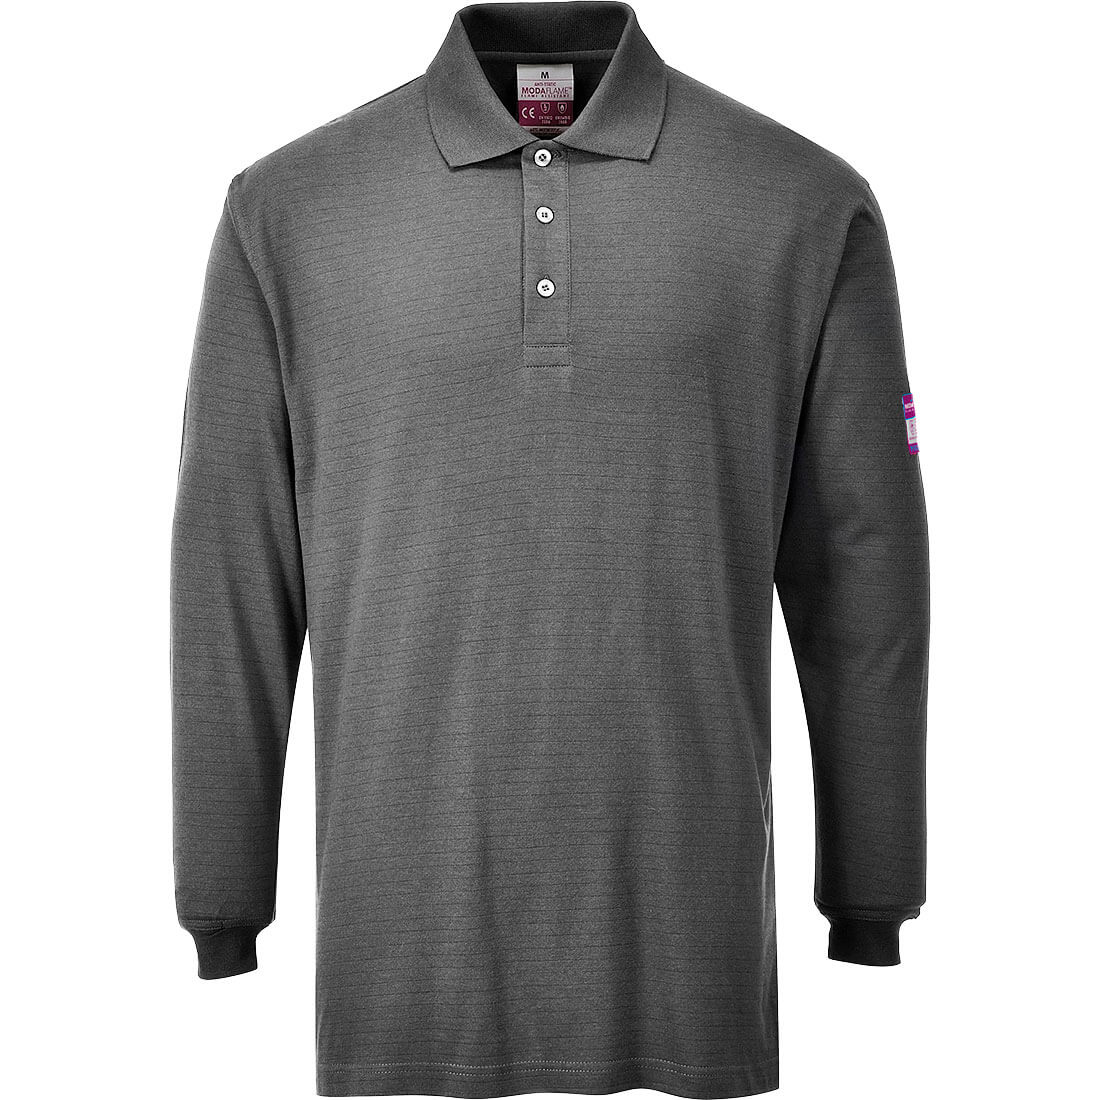 Image of Modaflame Mens Flame Resistant Antistatic Long Sleeve Polo Shirt Grey L